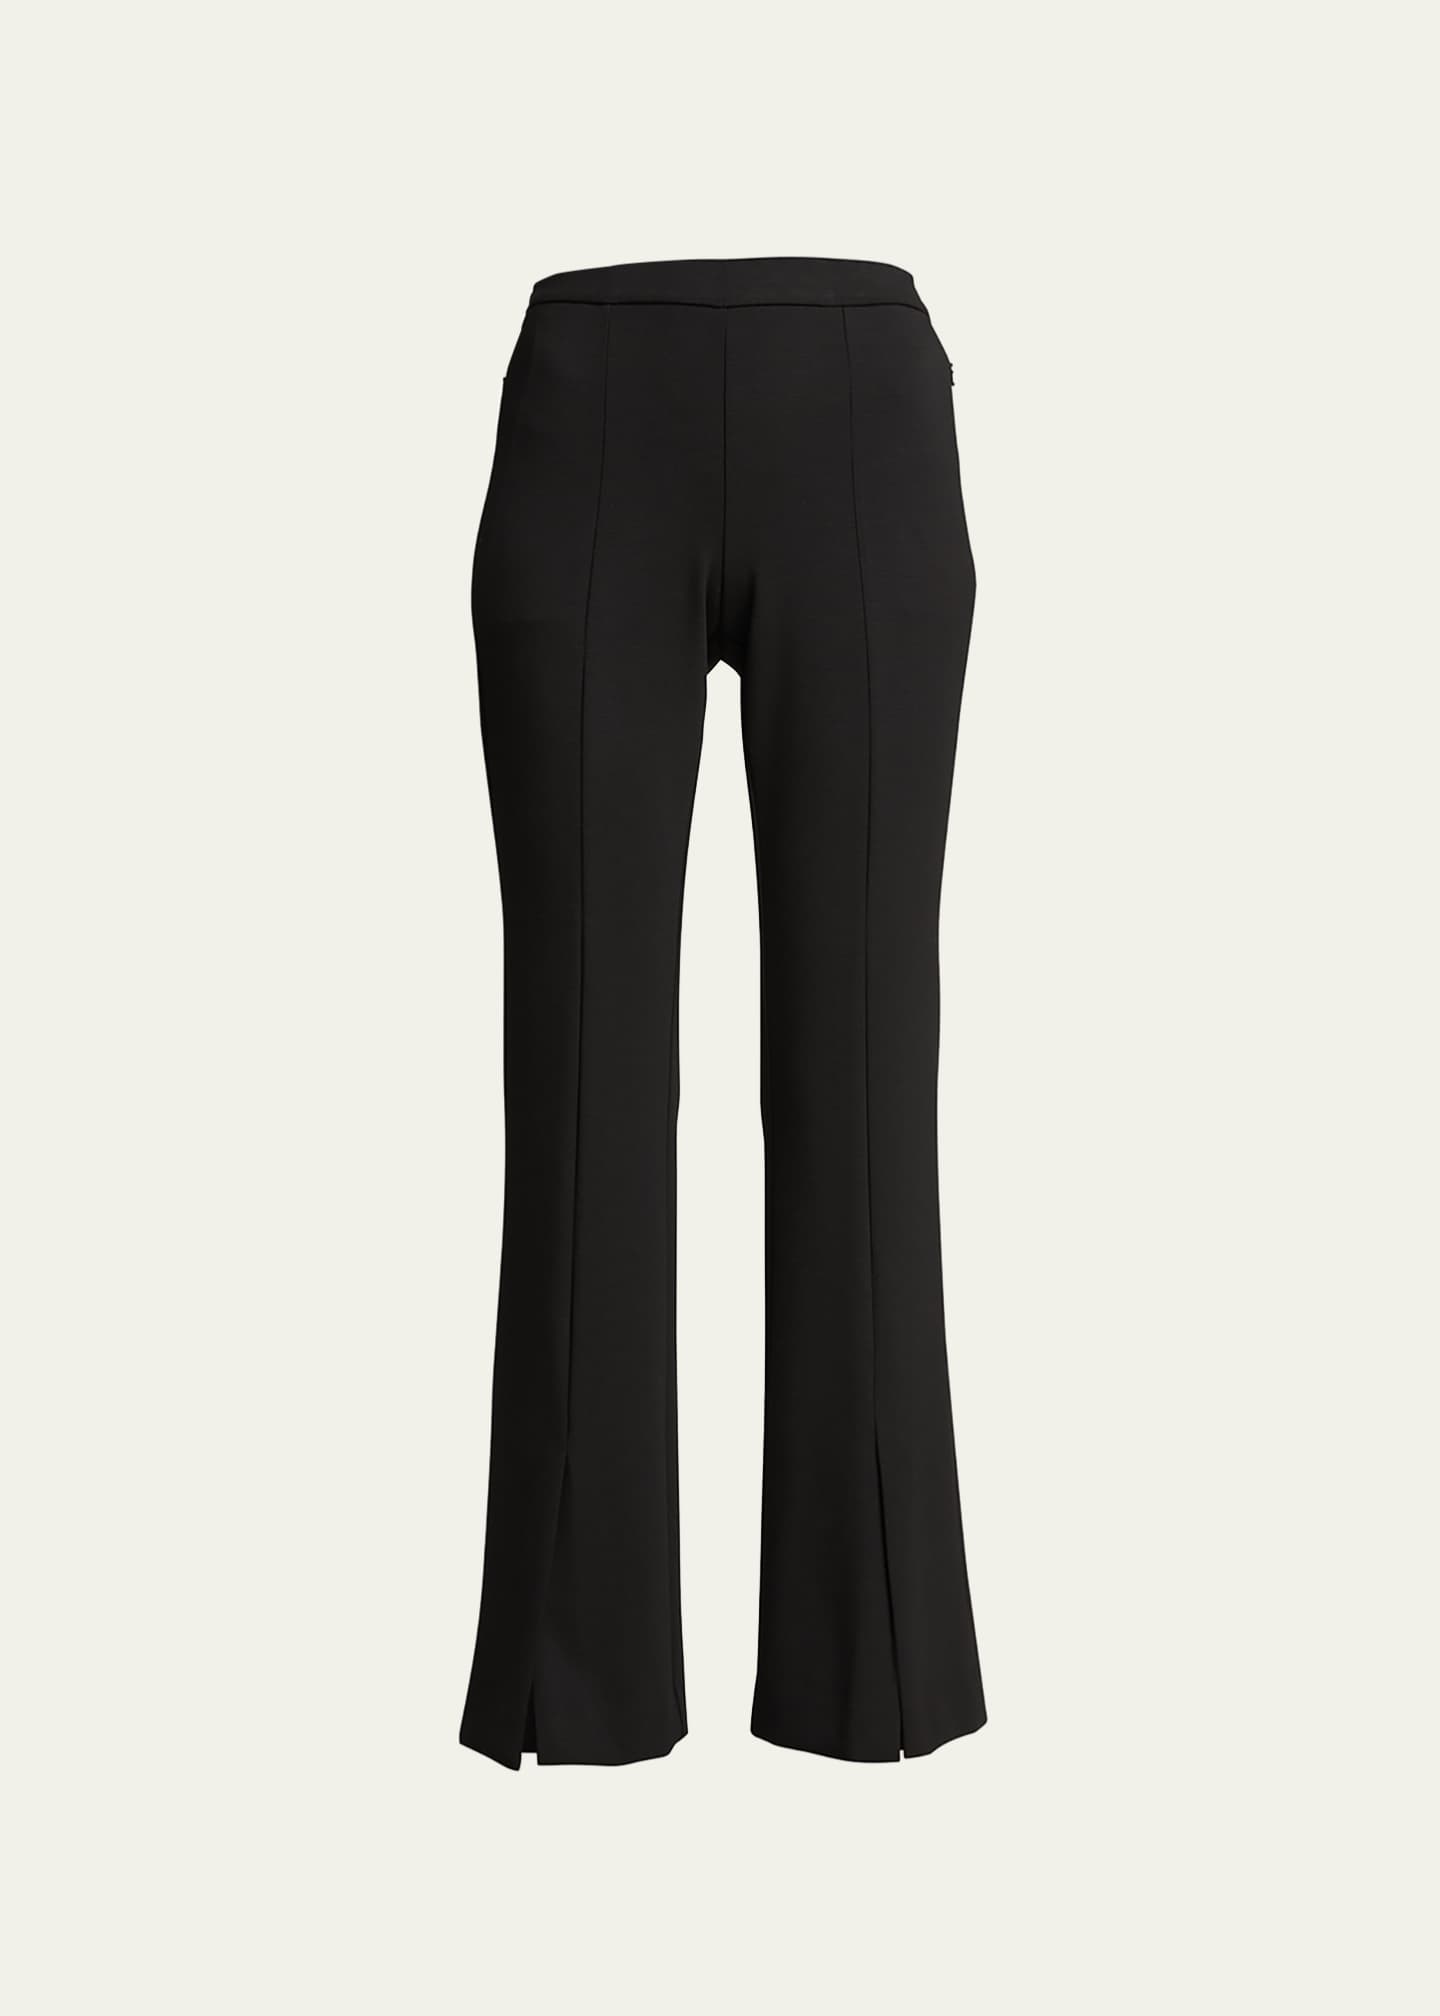 Theory Demitria Flare Double-Knit Vented Pants